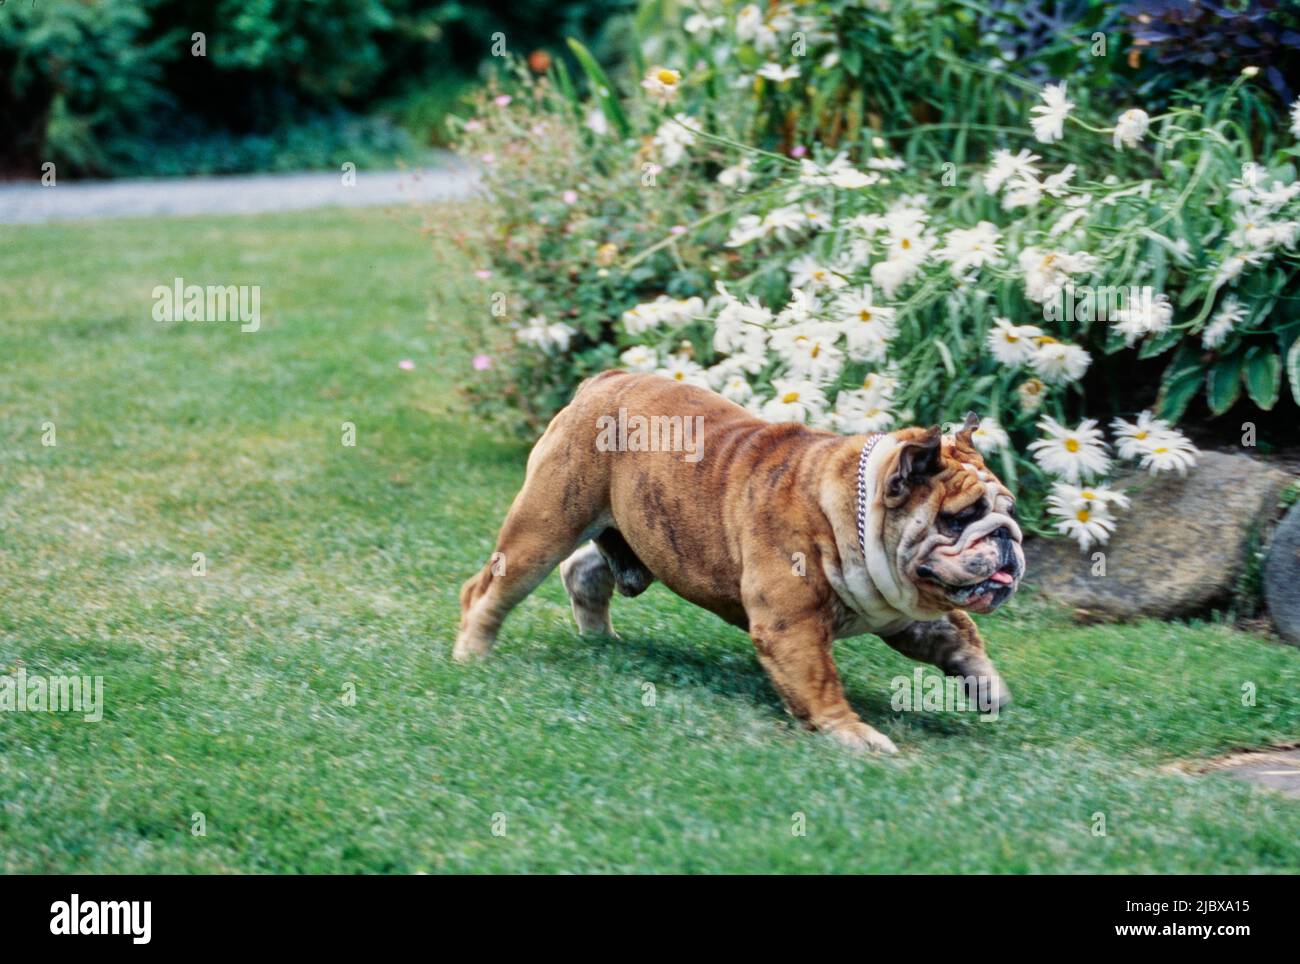 An English bulldog running through grass with white flower covered plant in the background Stock Photo